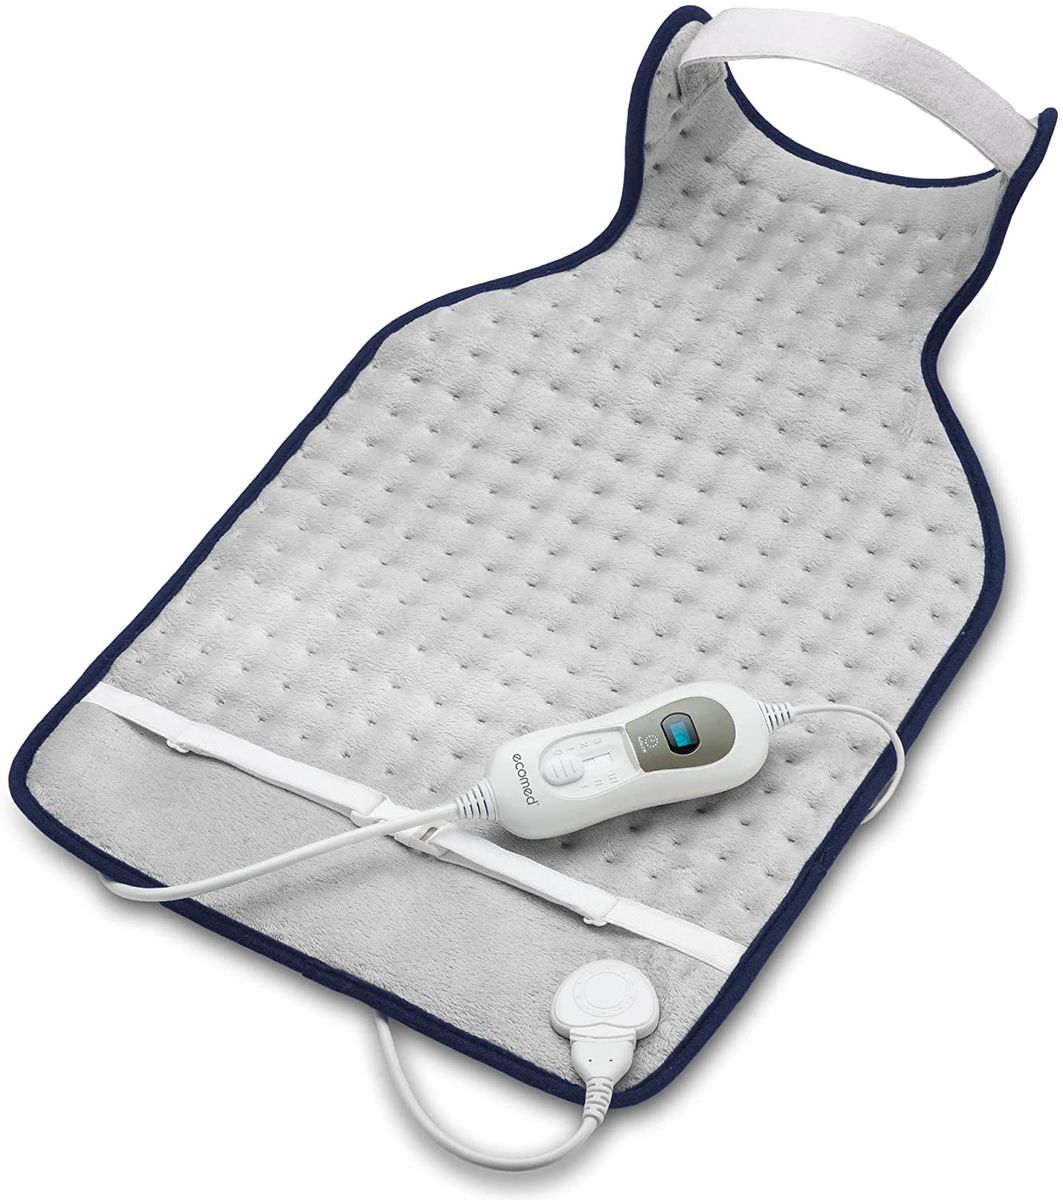 ecomed HP-46E neck heating pad, back heating pad with 3 temperature levels, heat pad with overheating protection, automatic shut-off, washable 1st generation.